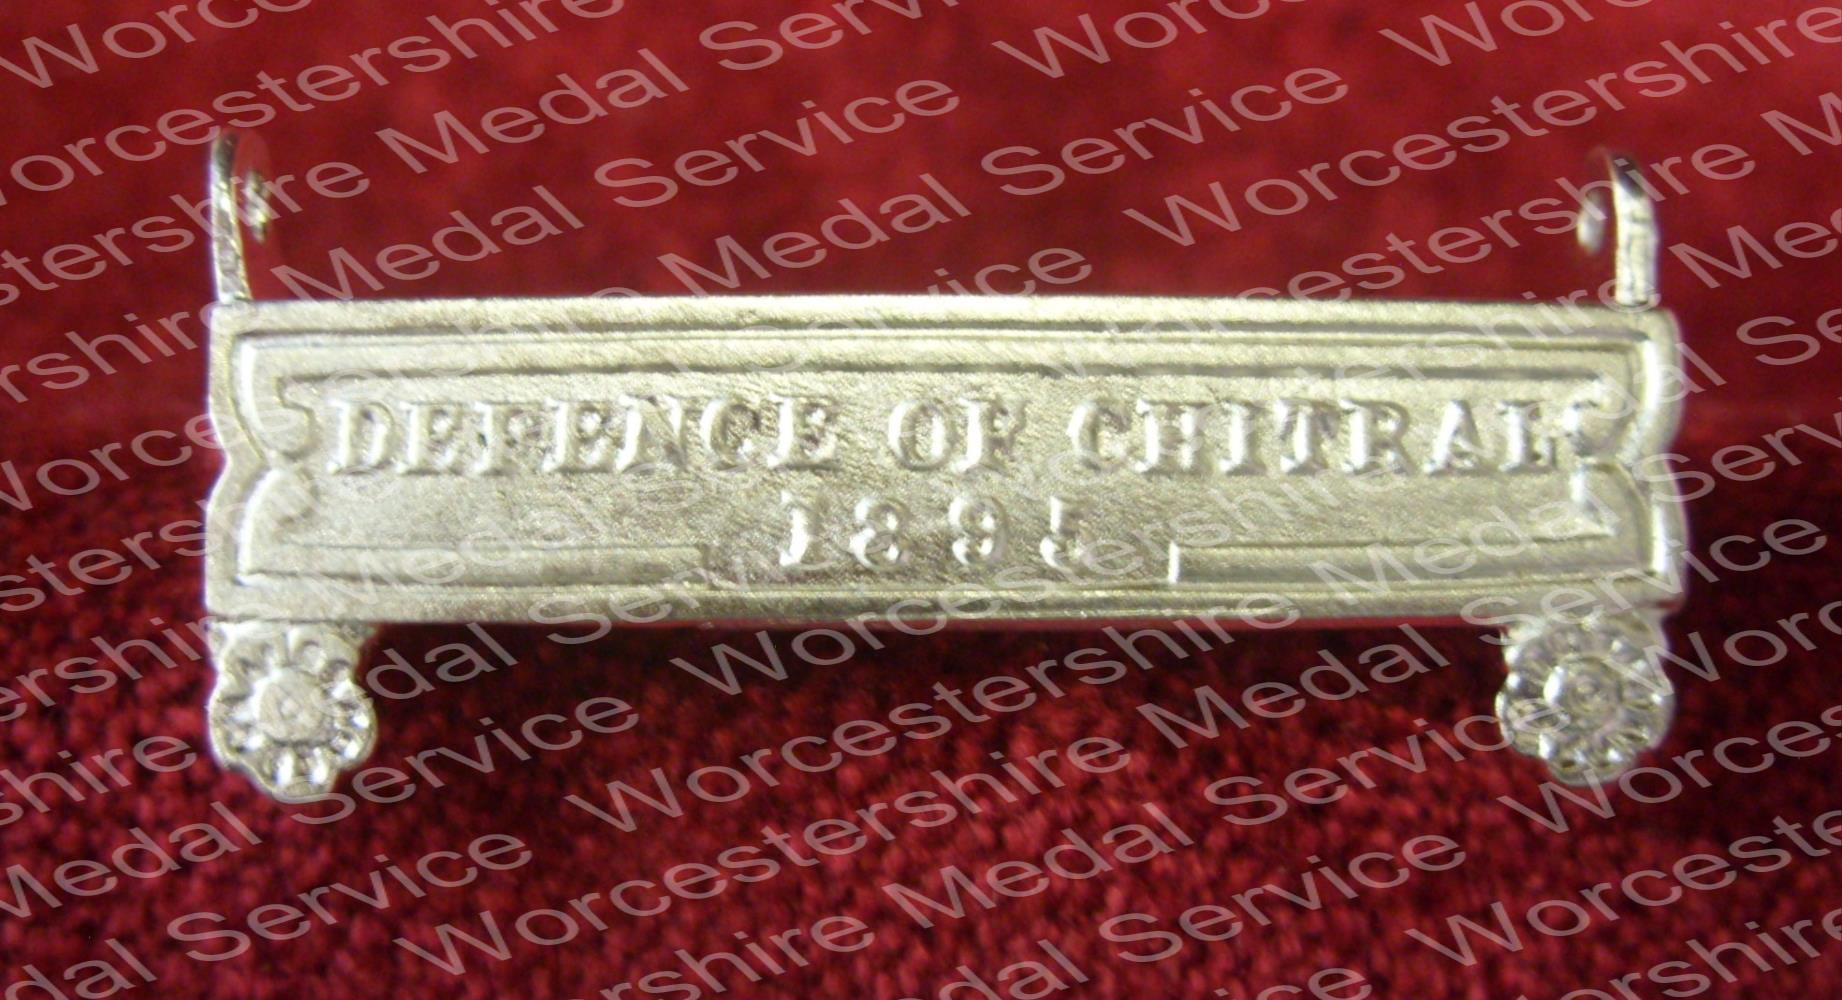 Worcestershire Medal Service: Clasp - Defence of Chitral 1895